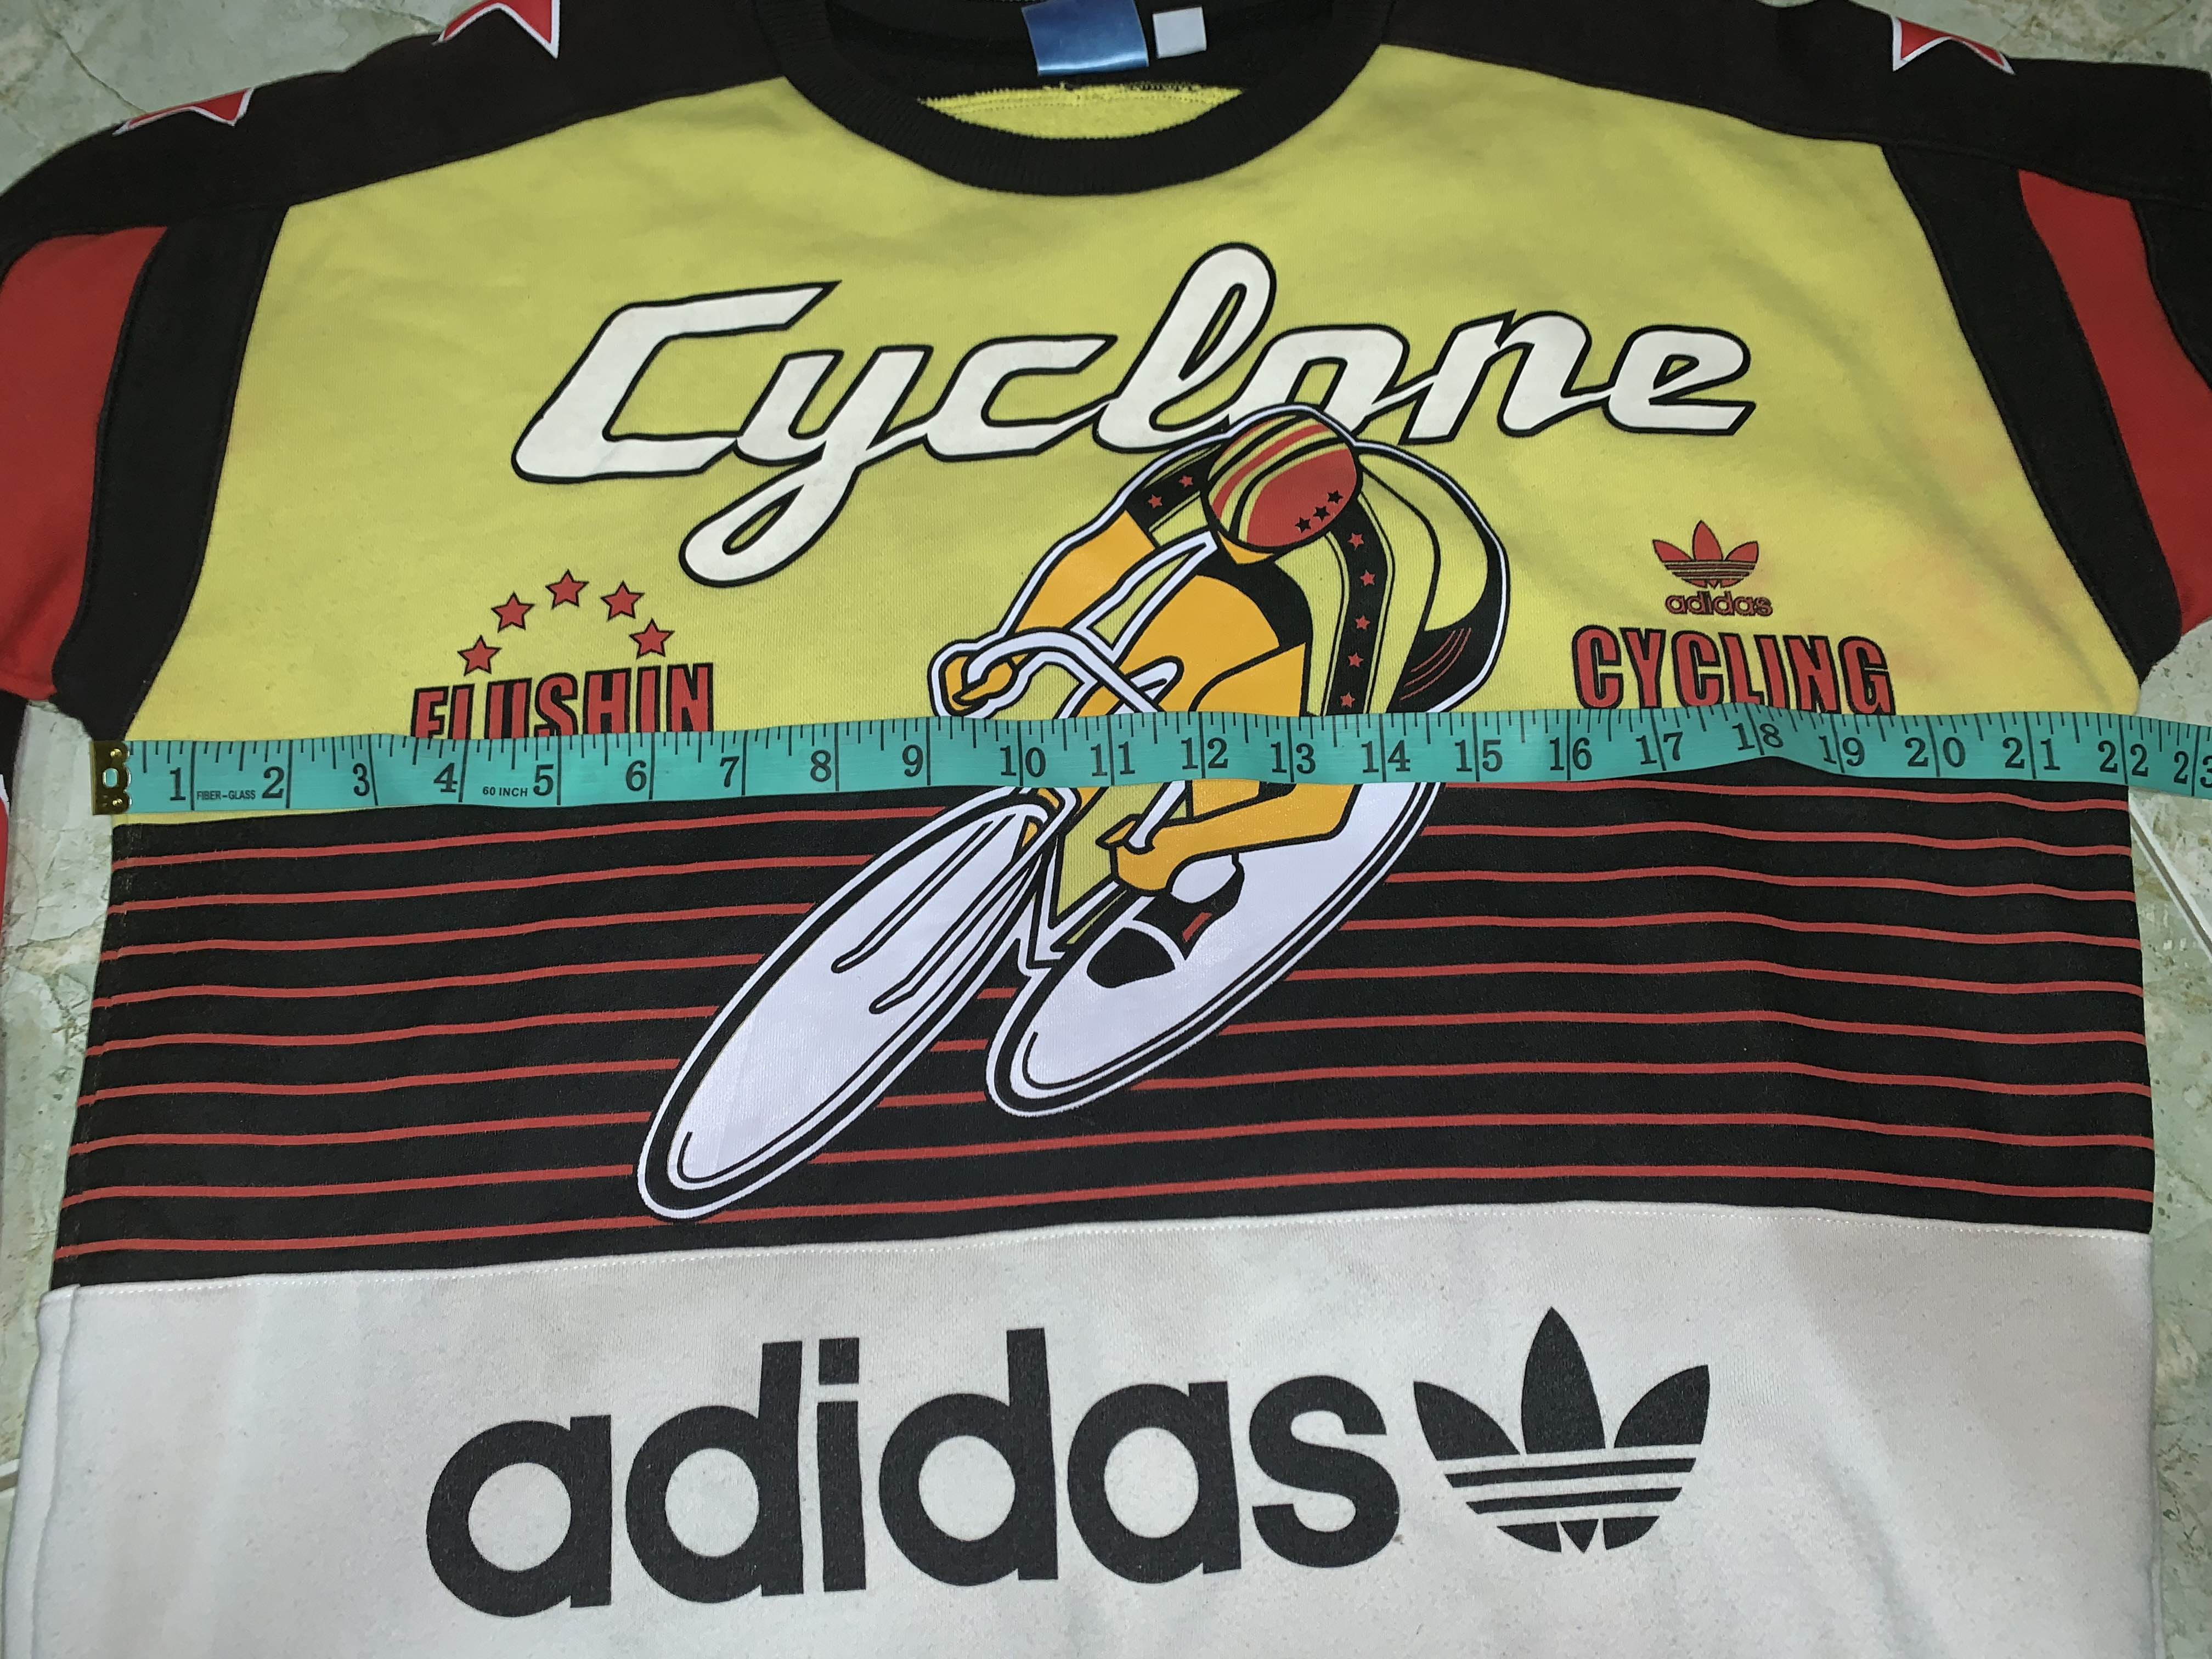 Adidas CYCLONE PullOver sweaters - 5